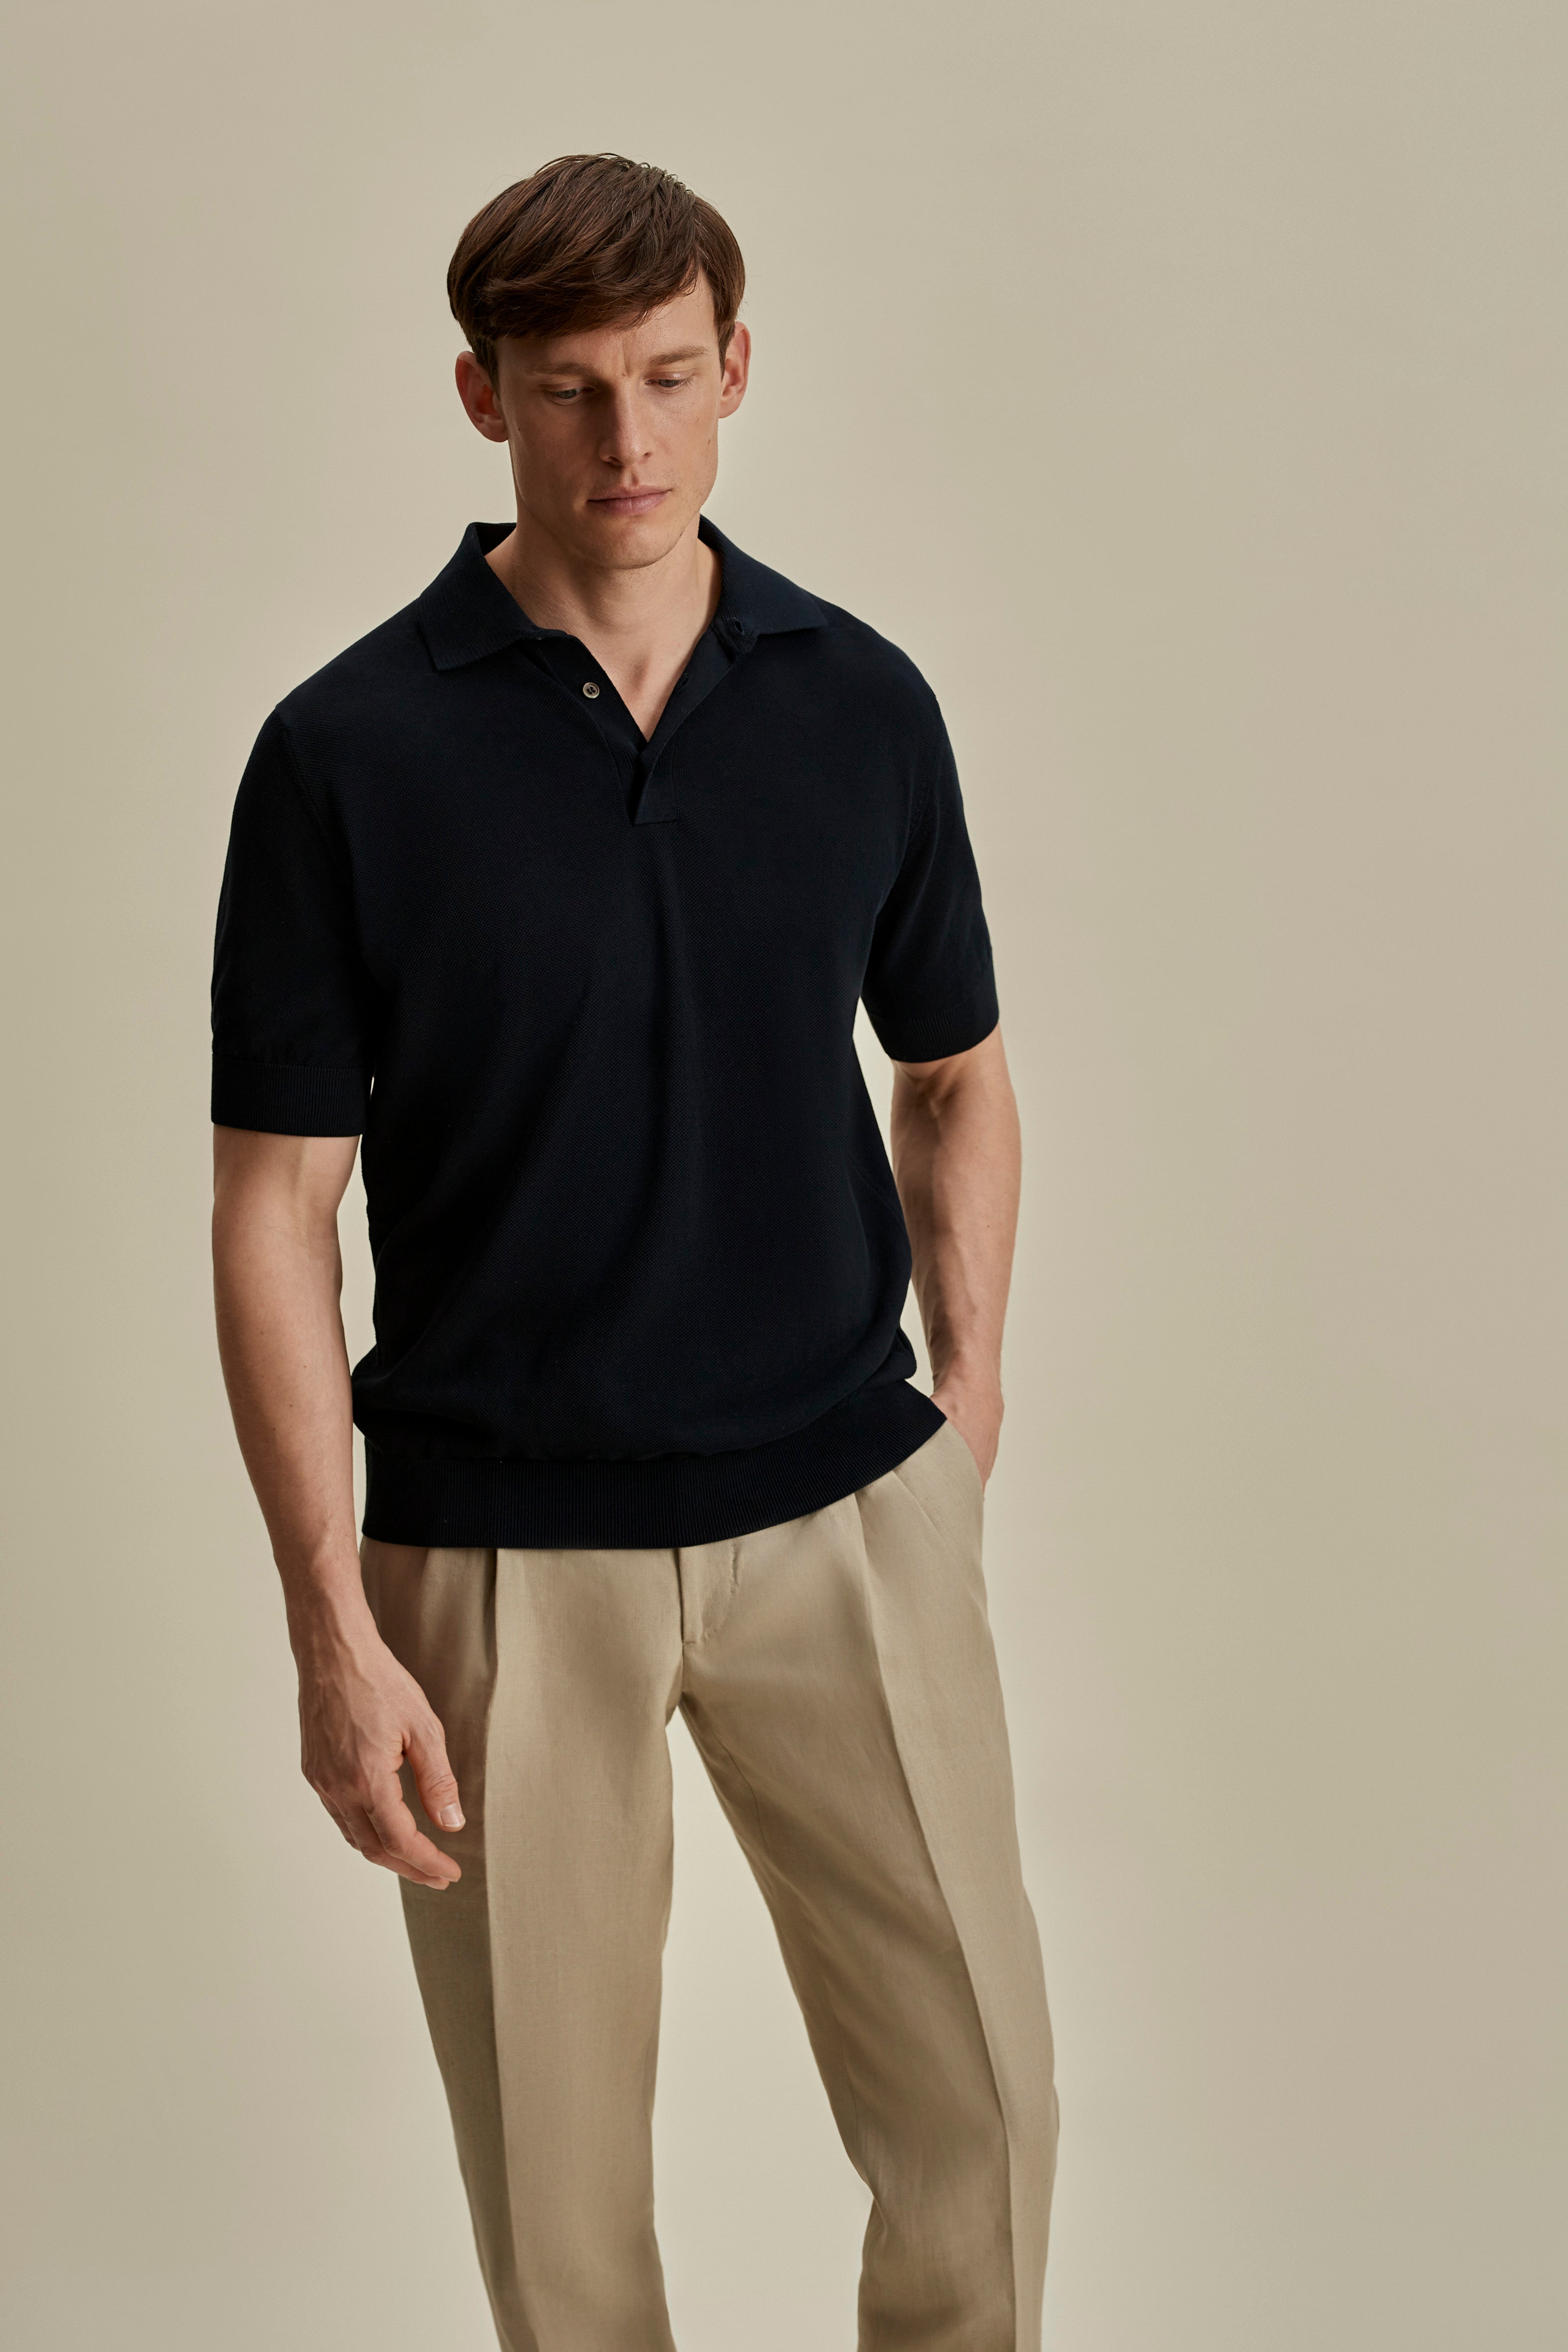 Cotton Air Crepe Polo Shirt Navy Mid Crop Model Image